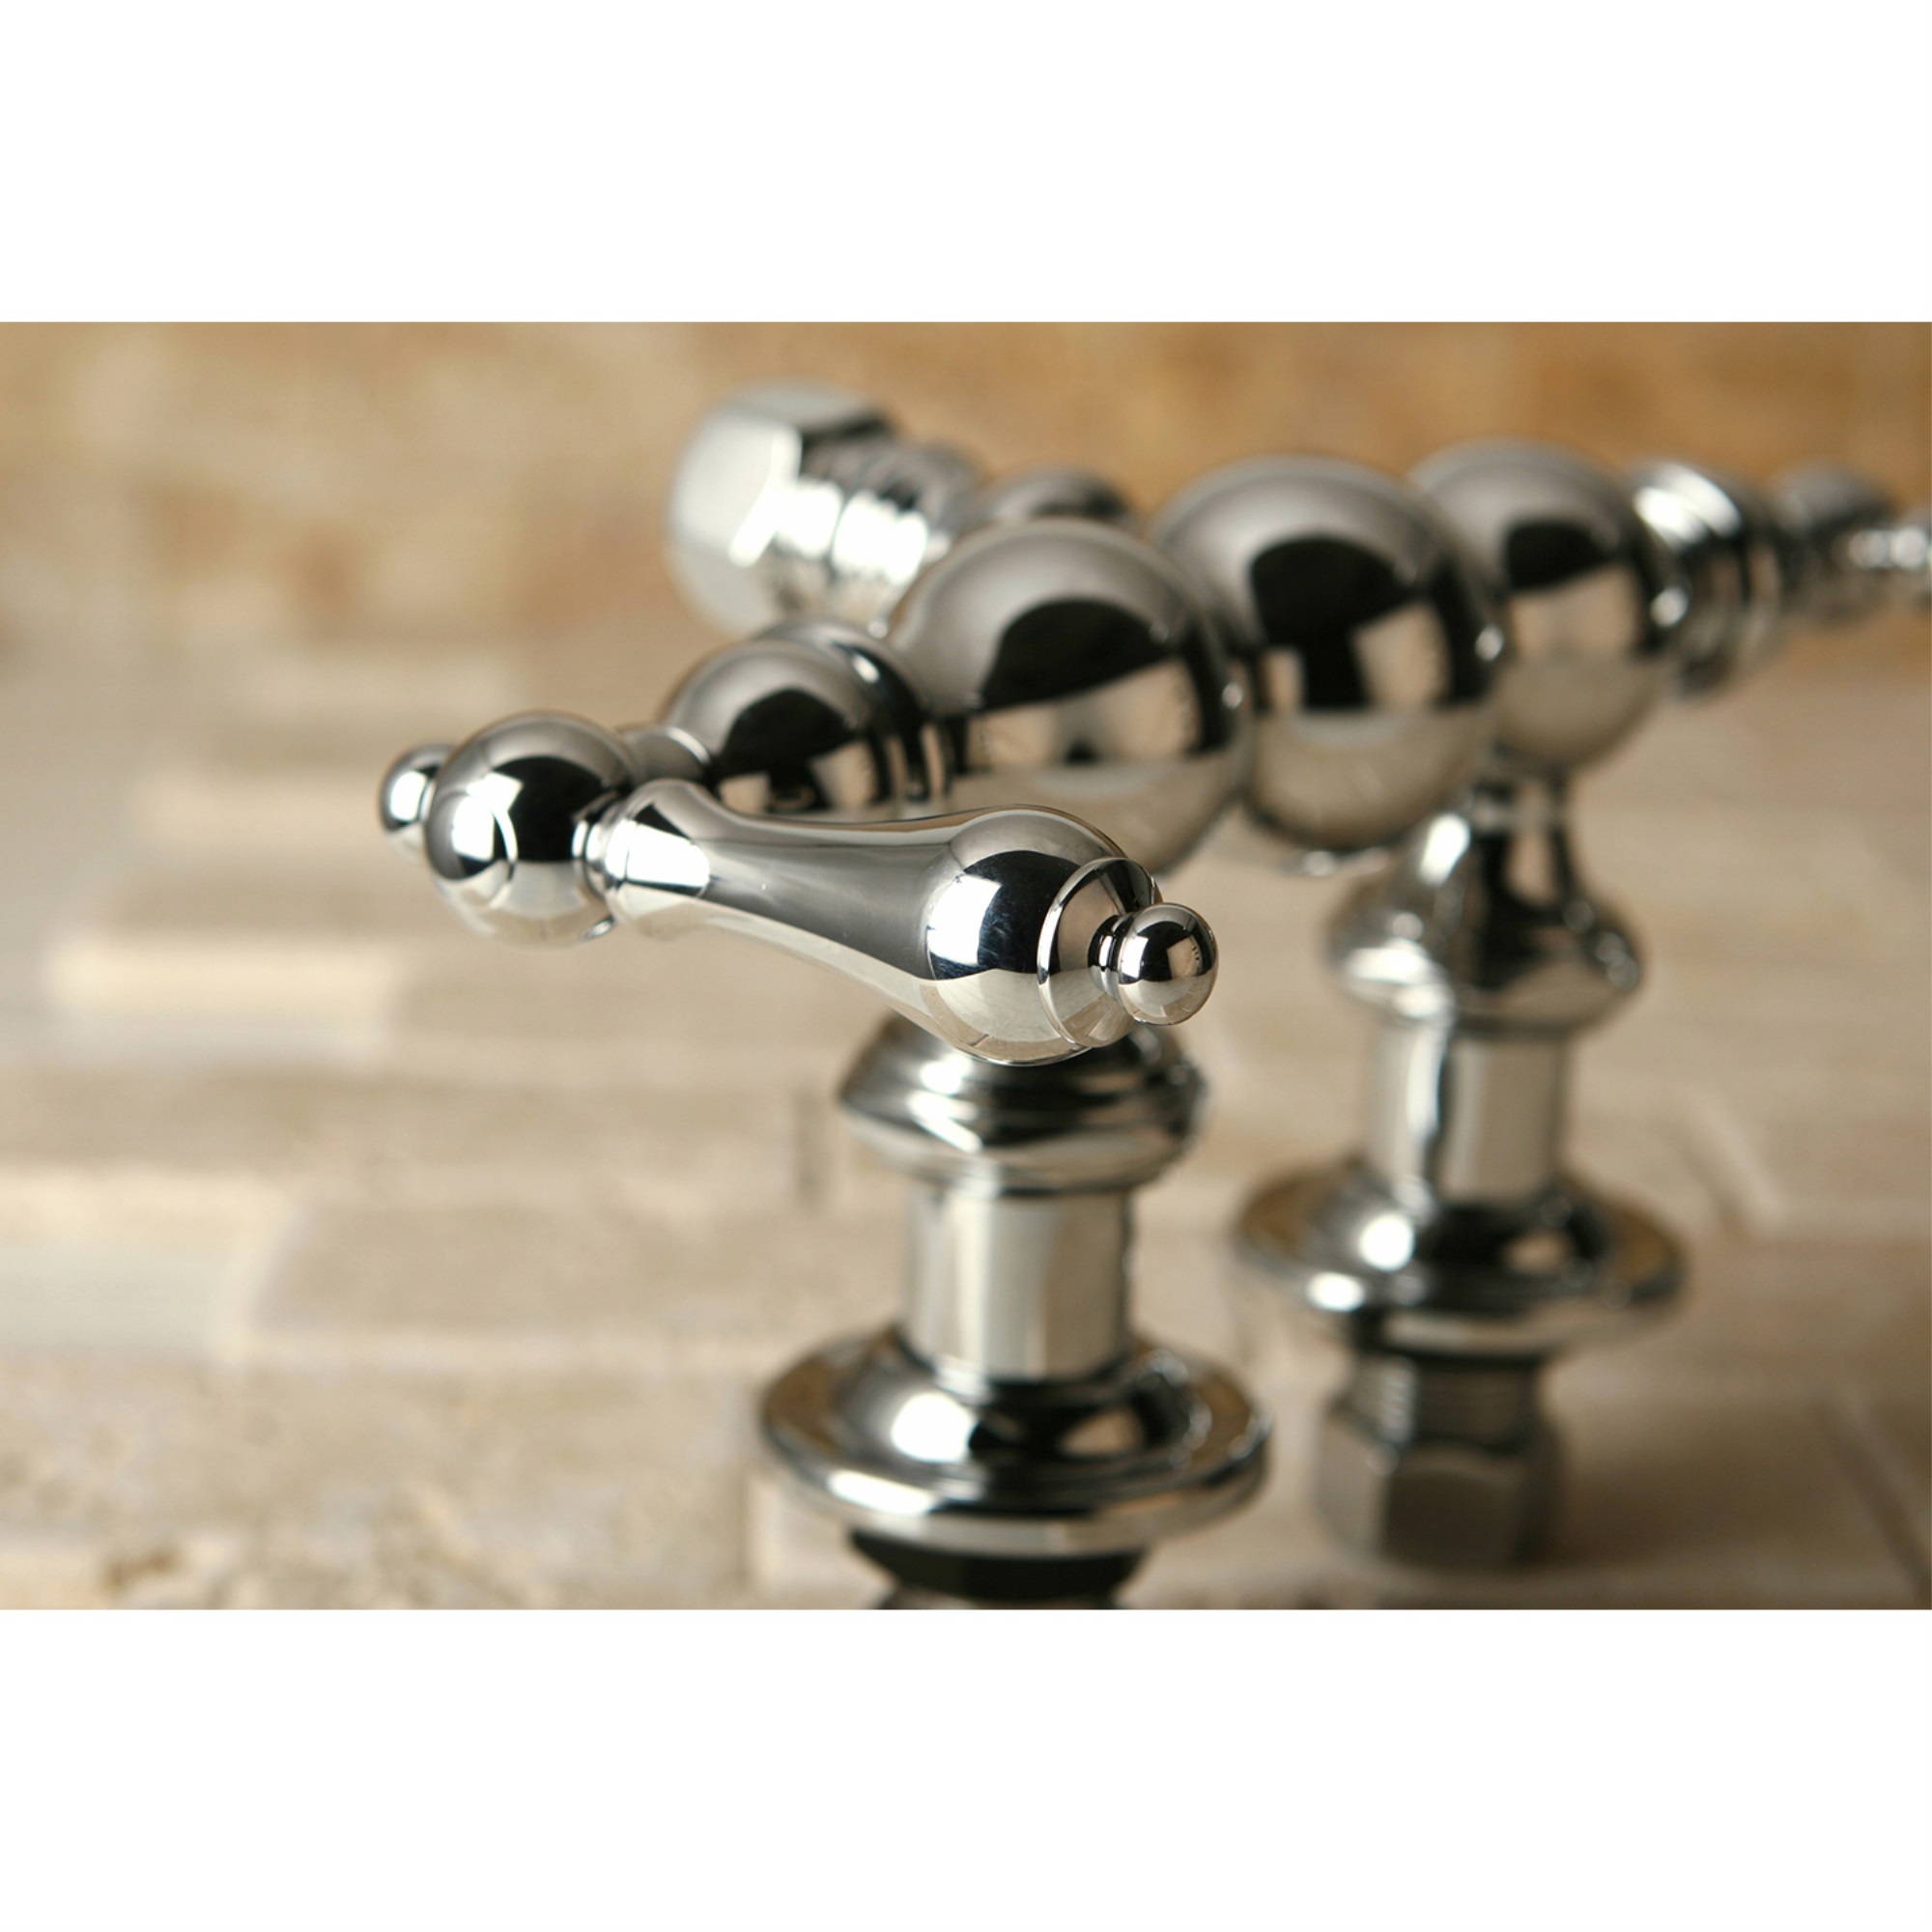 Kingston Brass ABT700-1 Faucet Body Only, Polished Chrome